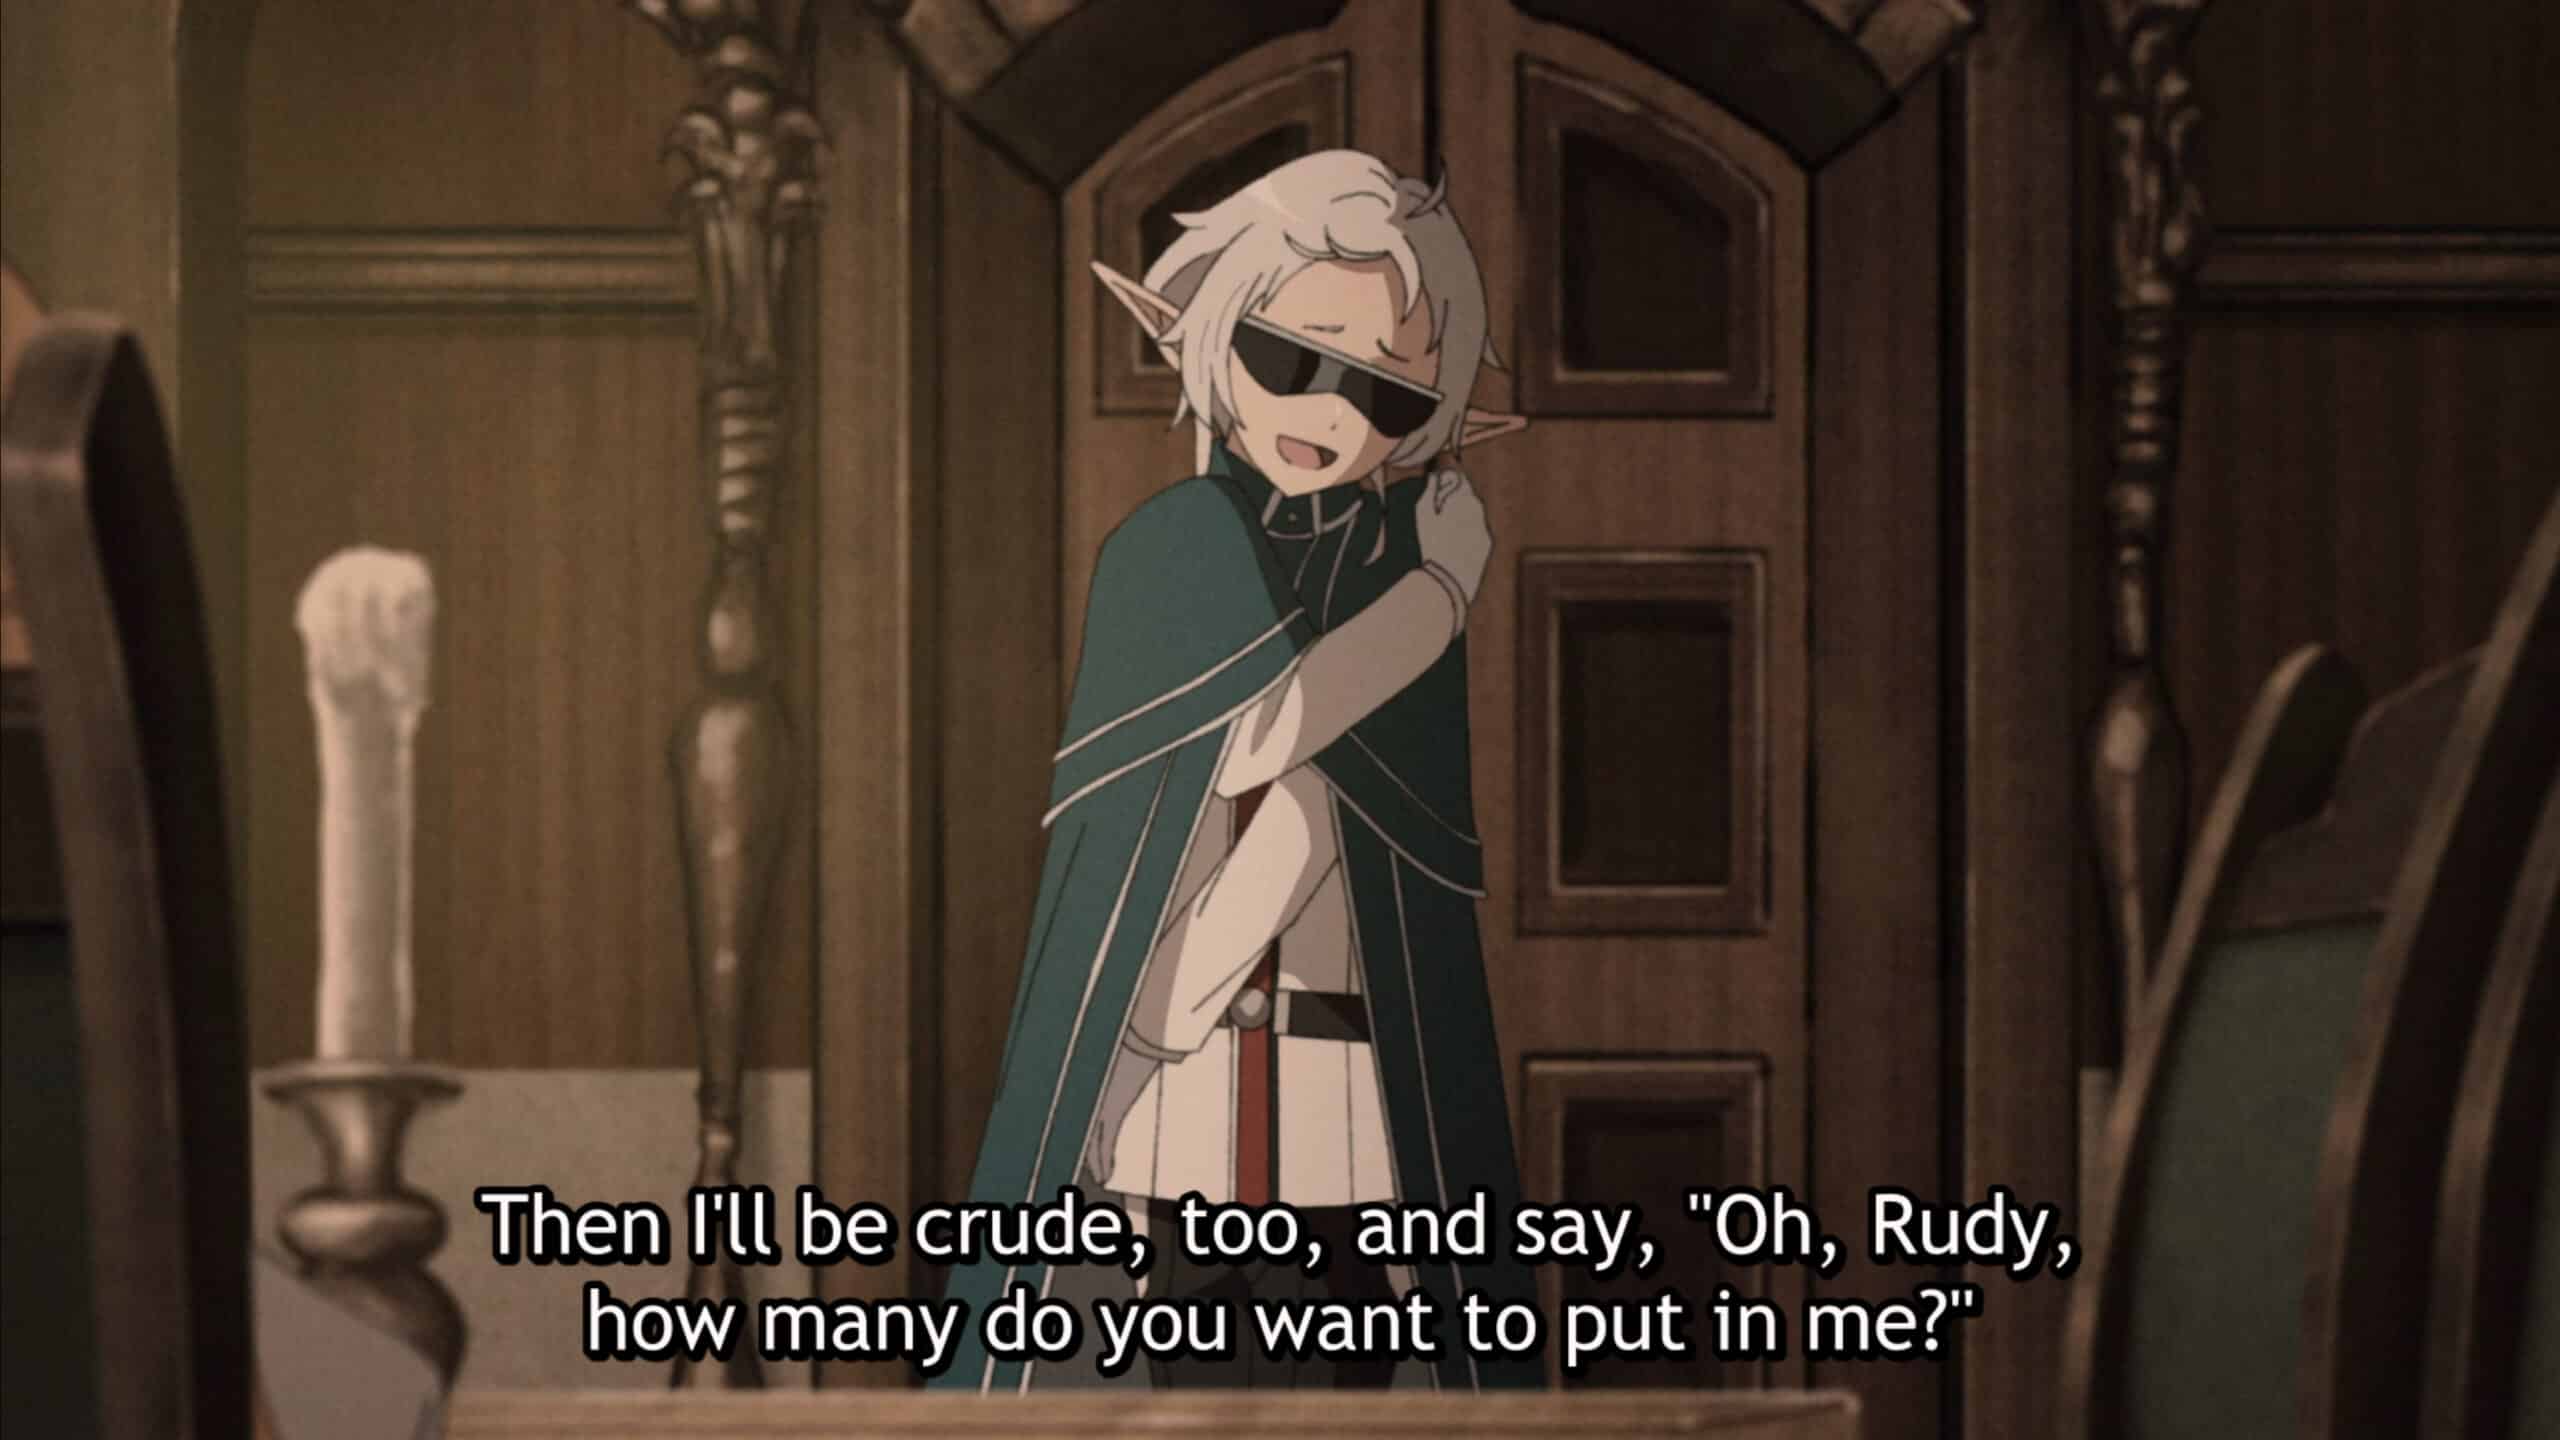 Sylphie (Ai Kayano) talking about what she would want Rudy to do to her